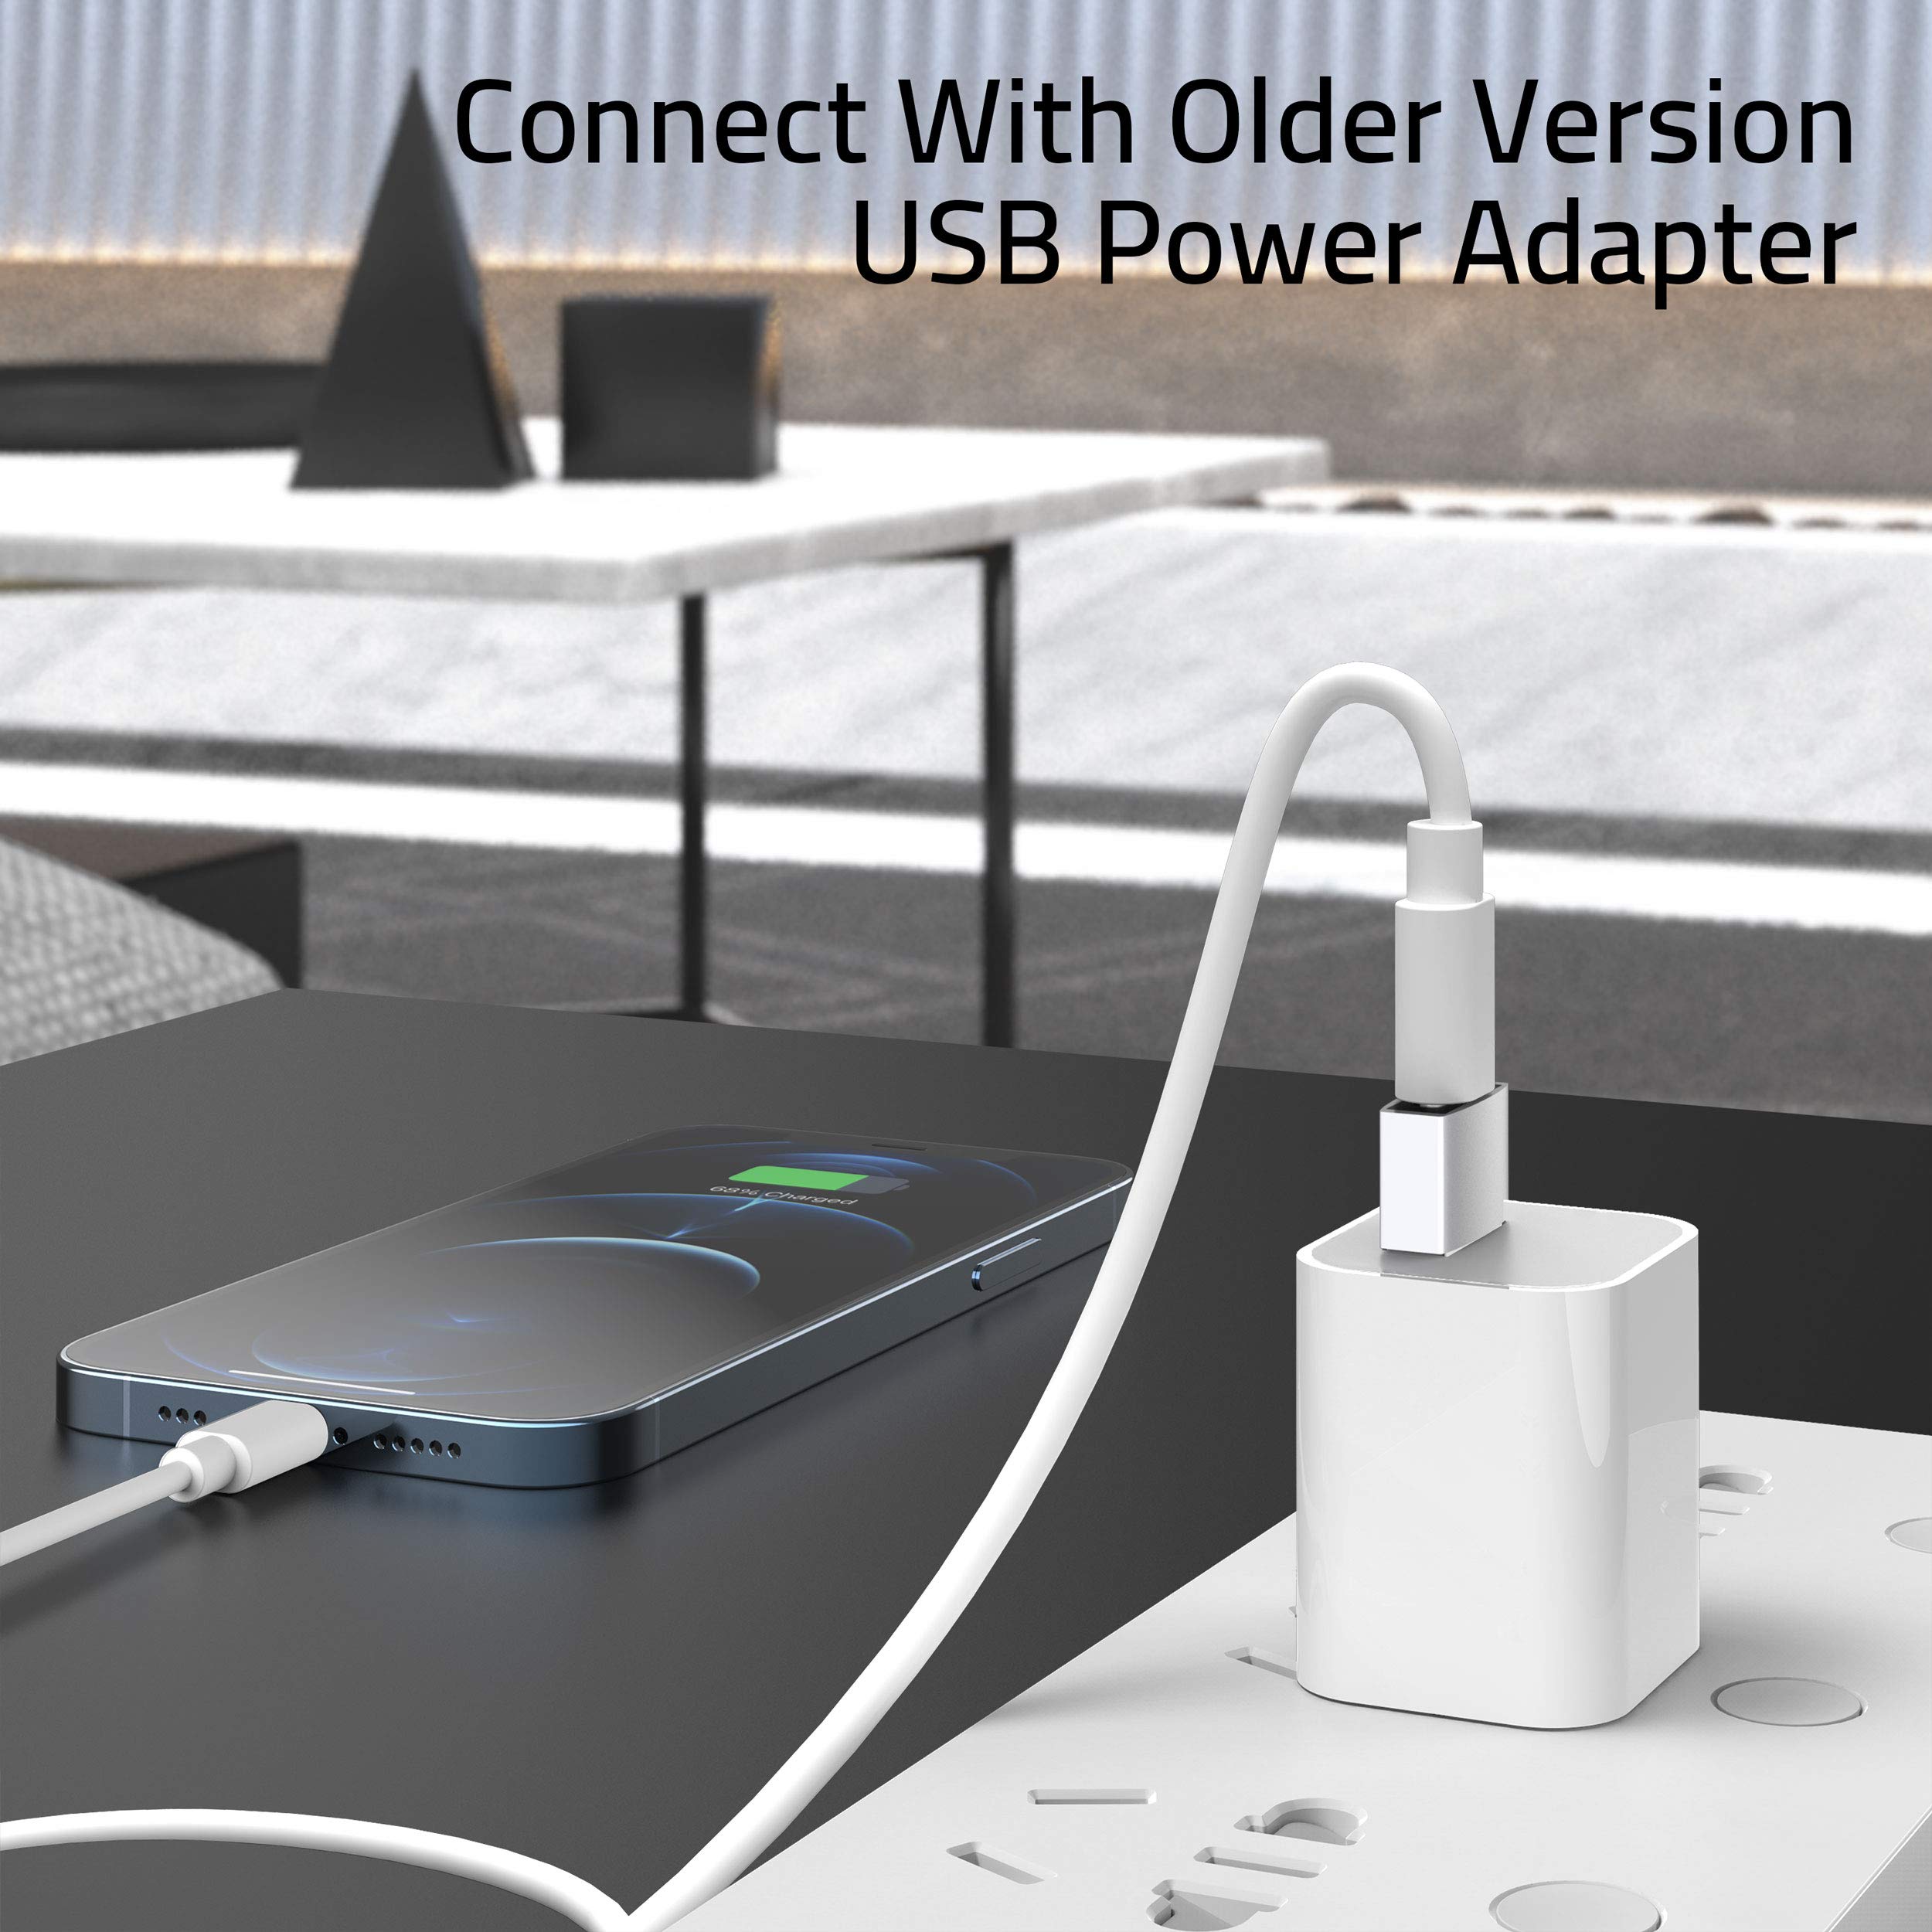 connect with older version usb power adapter